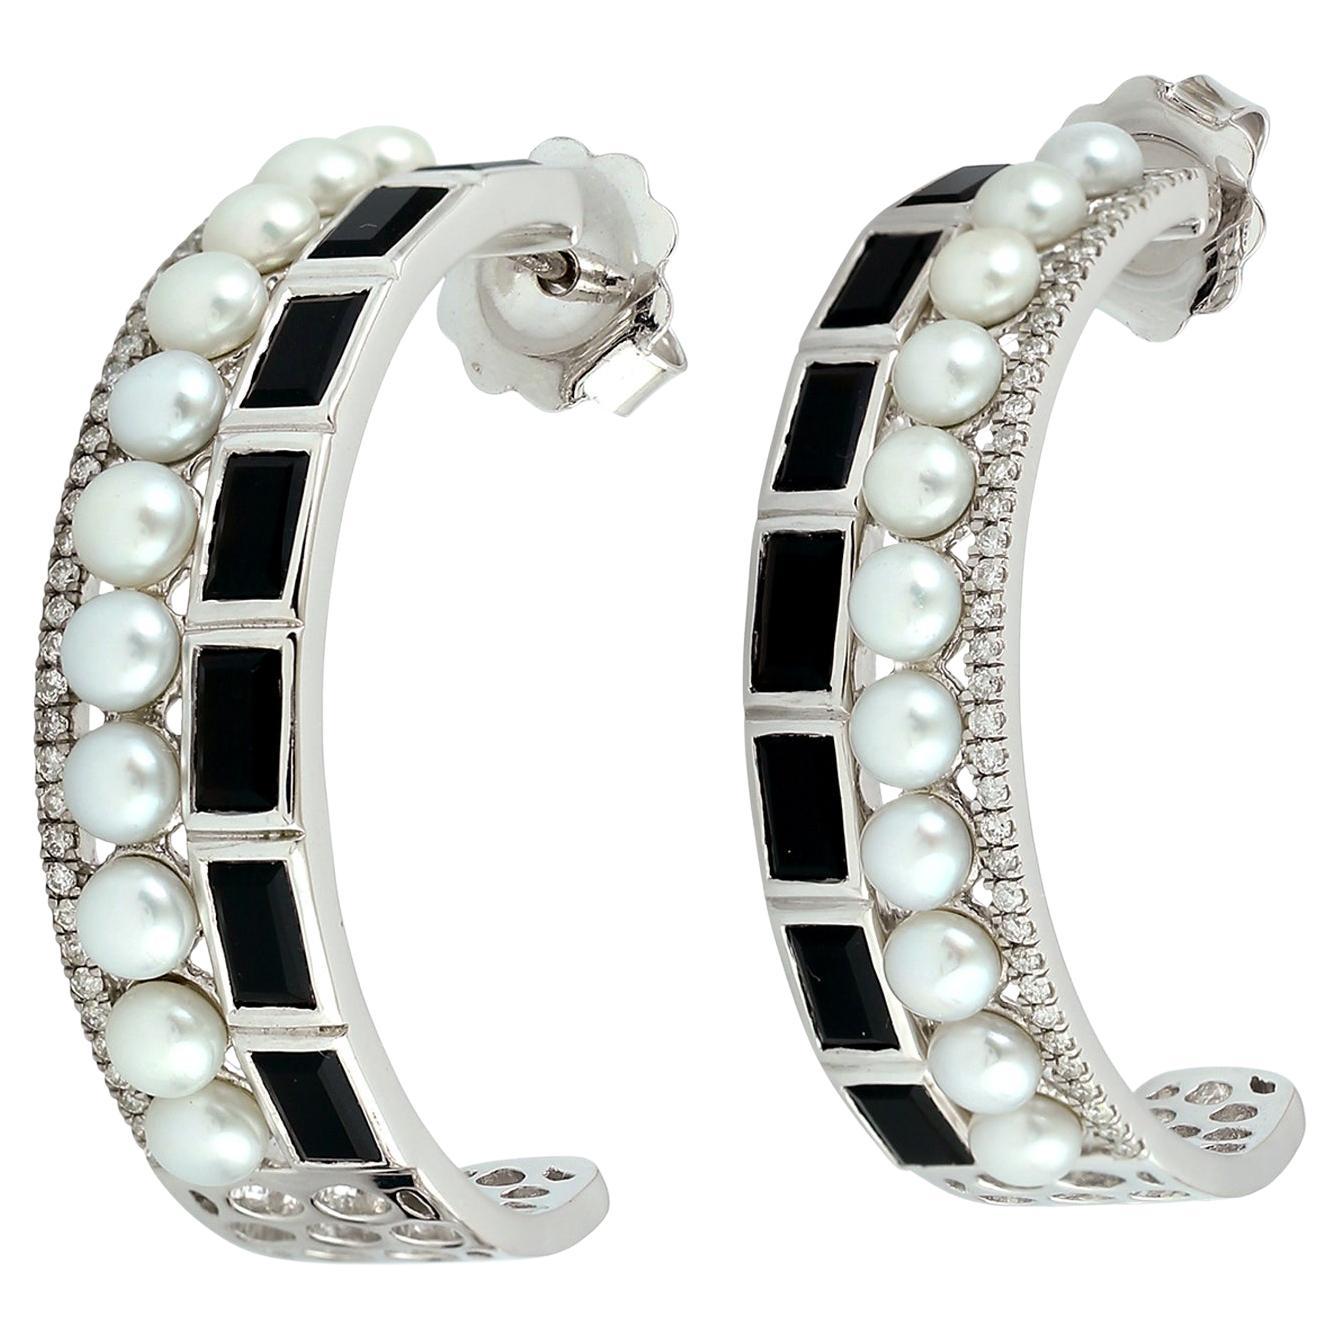 Black Onyx & Pearl Earrings With Diamonds Made In 18k White Gold For Sale